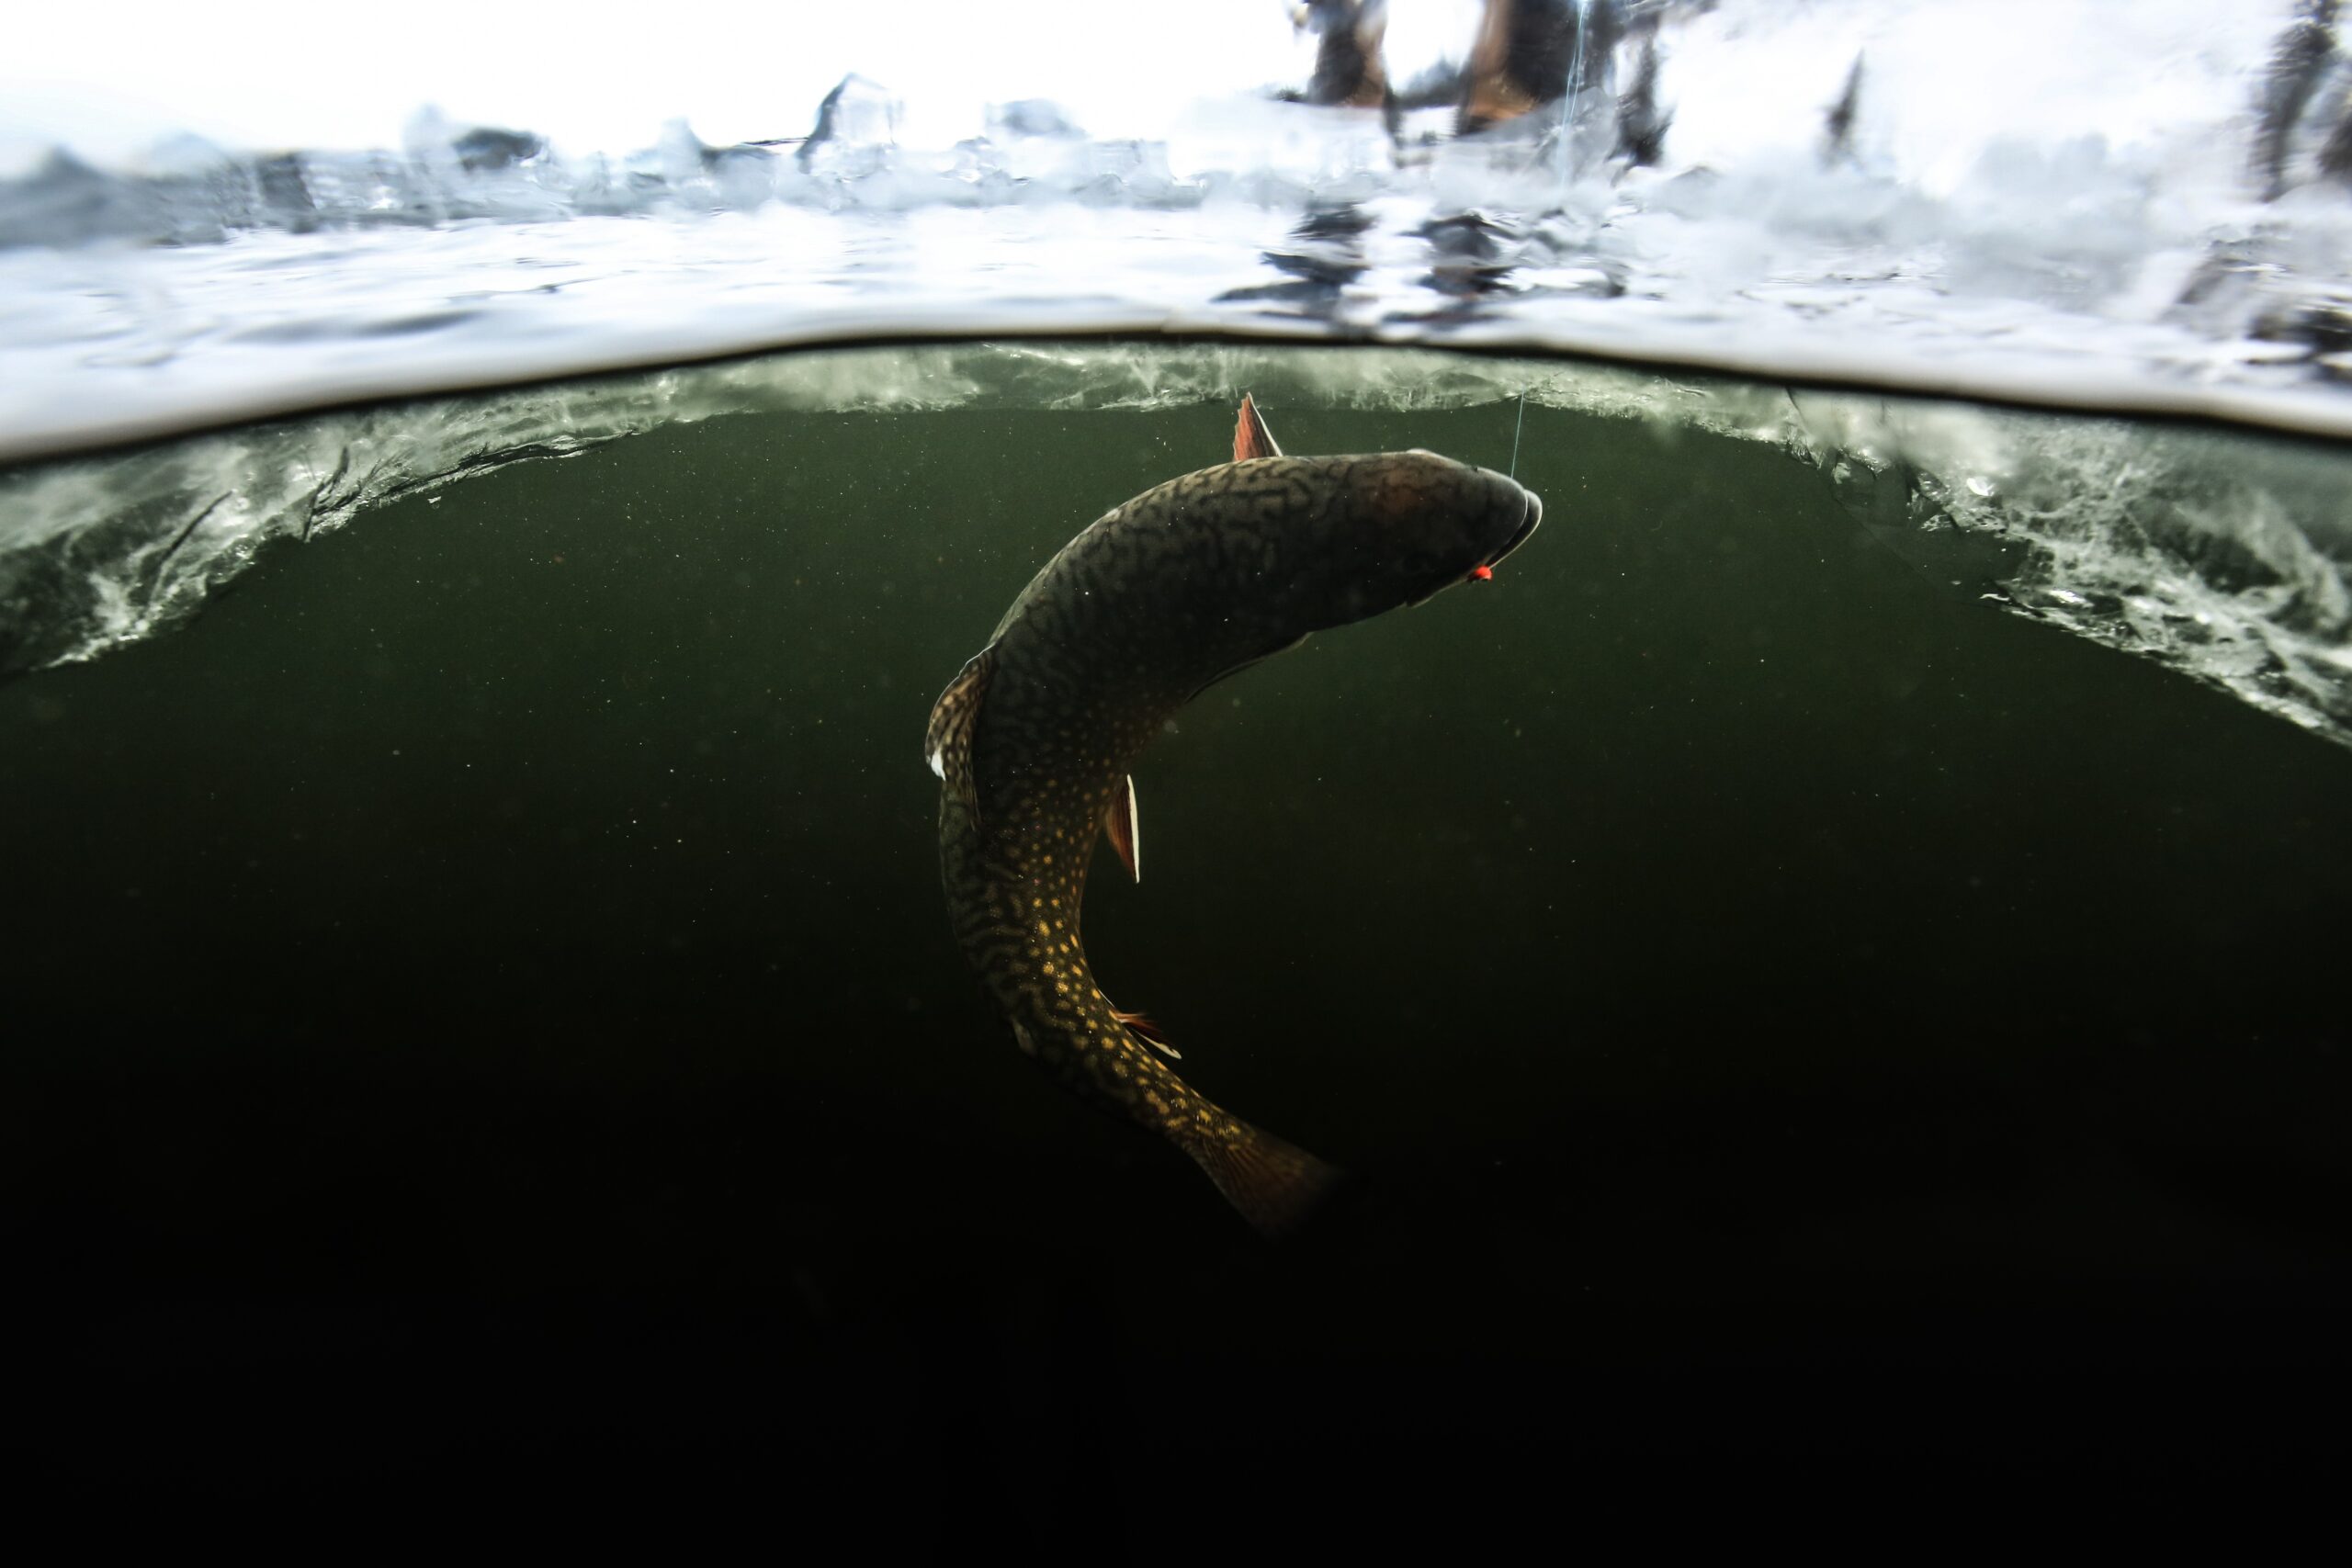 Ice-Fishing for Eastern Brook Trout